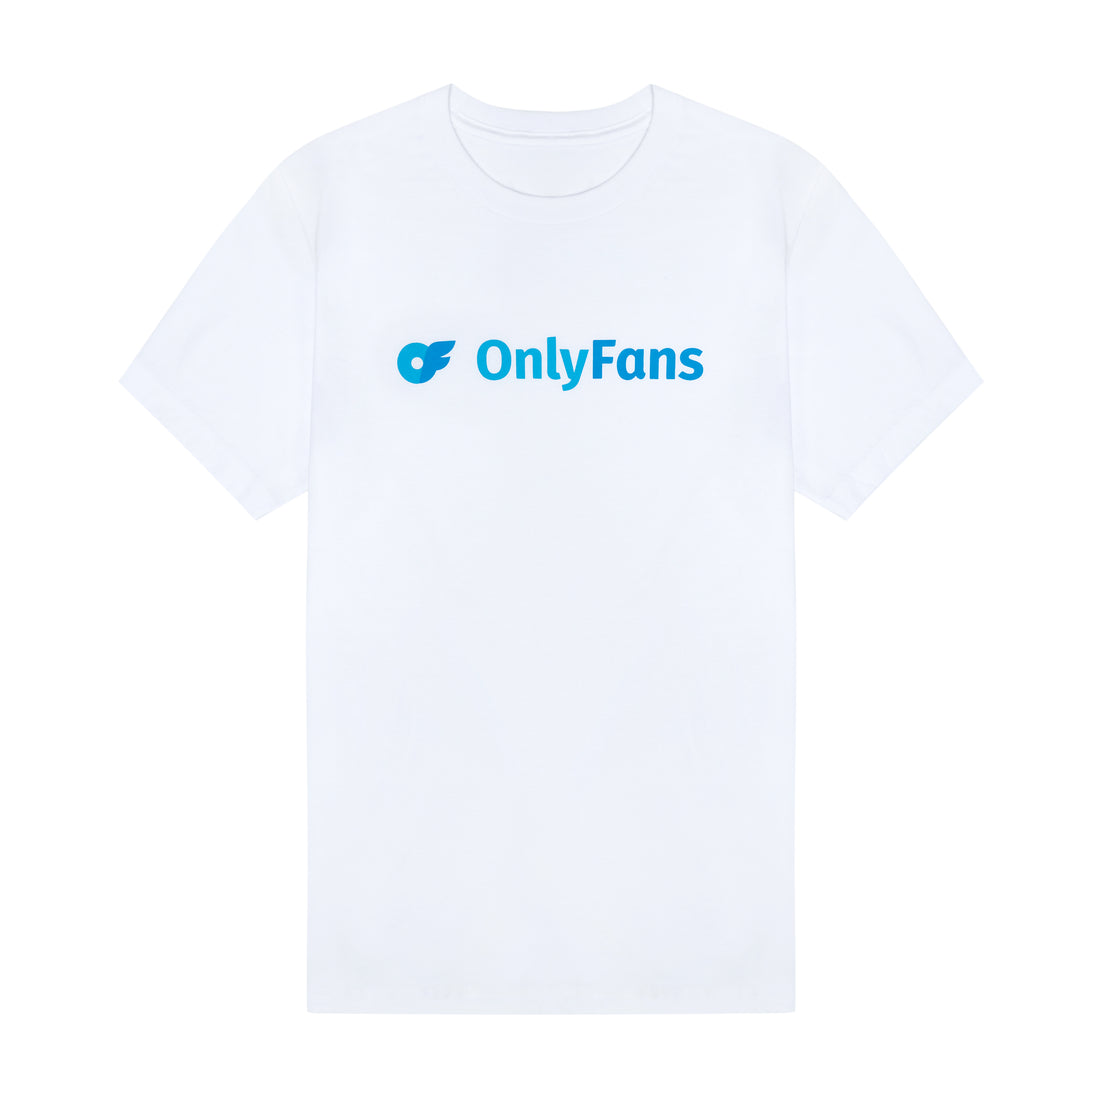 Only Fans - Limited Run, Unisex Graphic T-shirt